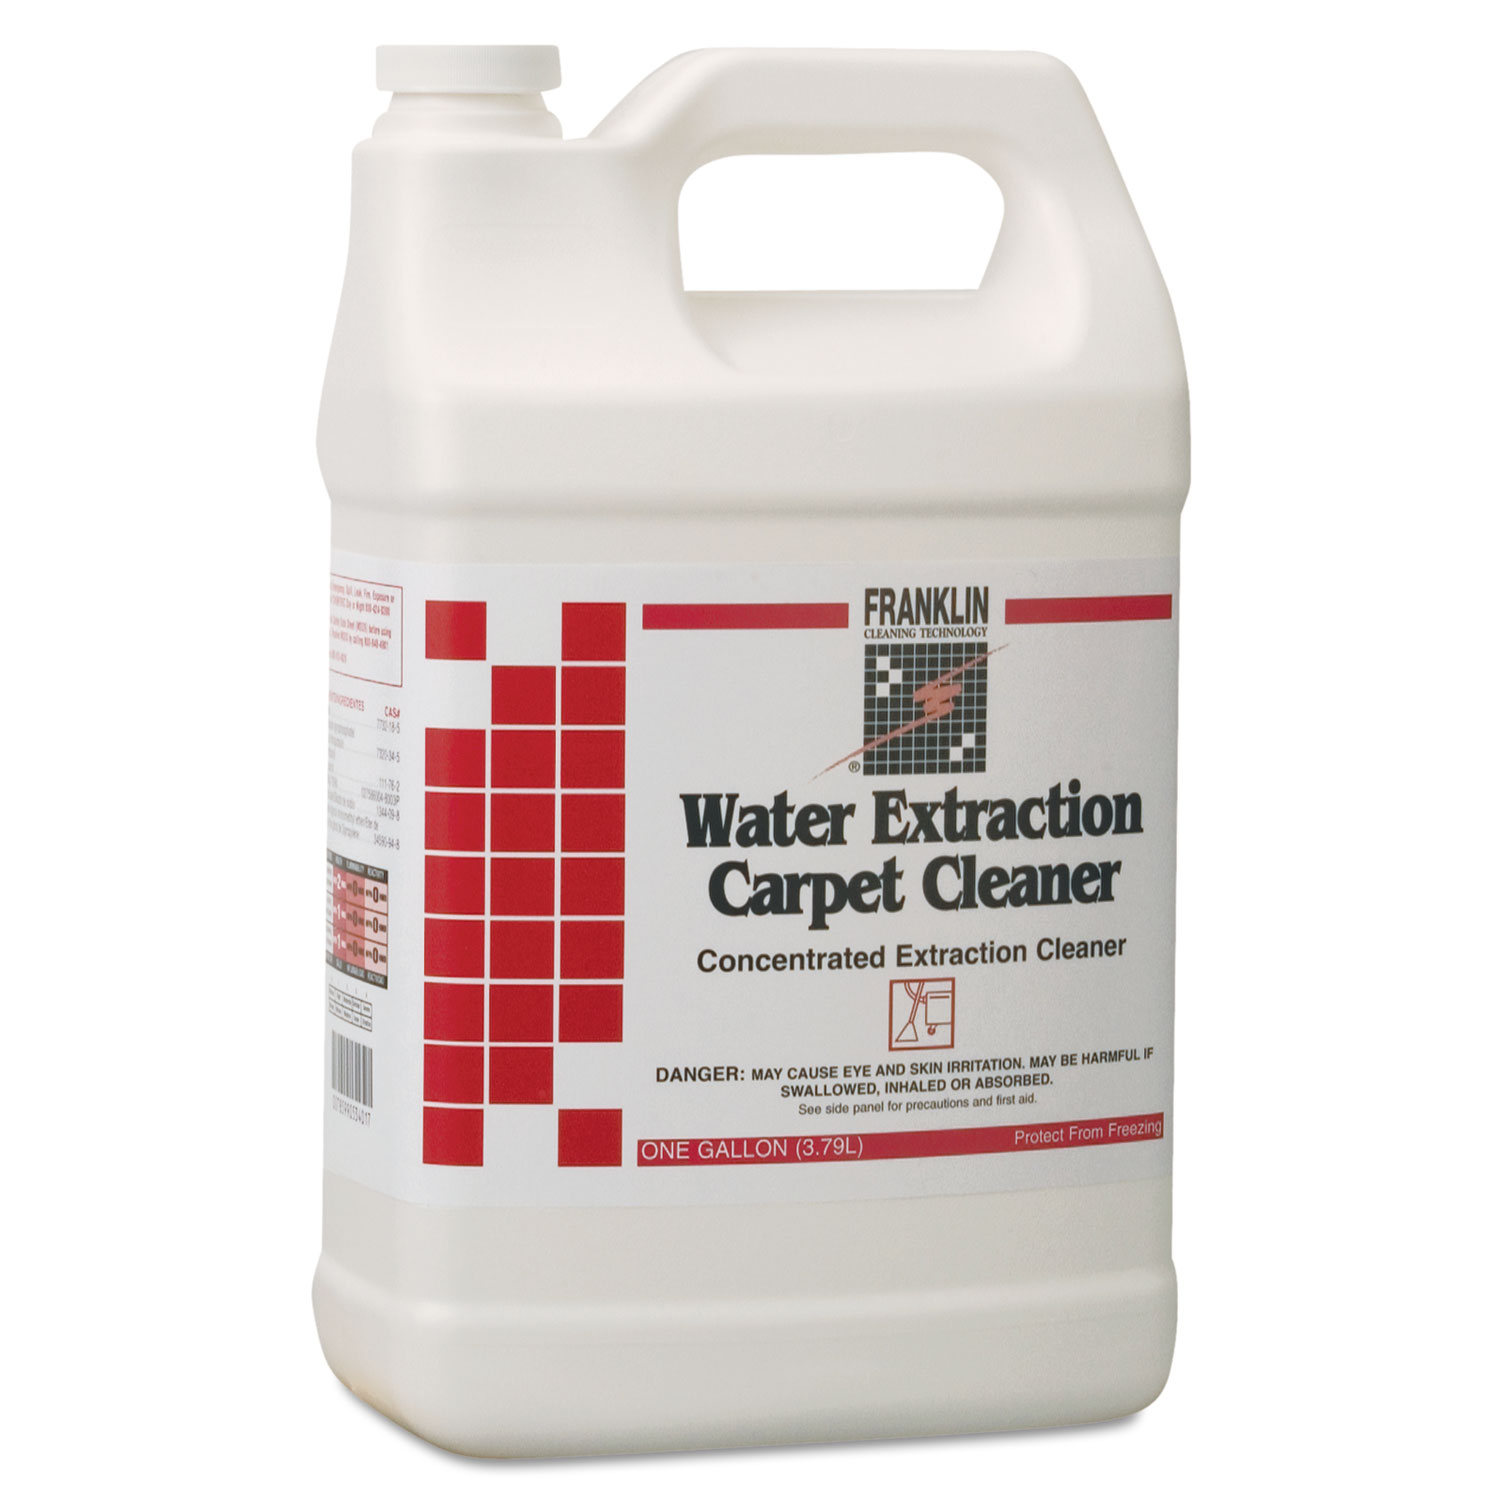 Water Extraction Carpet Cleaner, Floral Scent, Liquid, 1 gal. Bottle